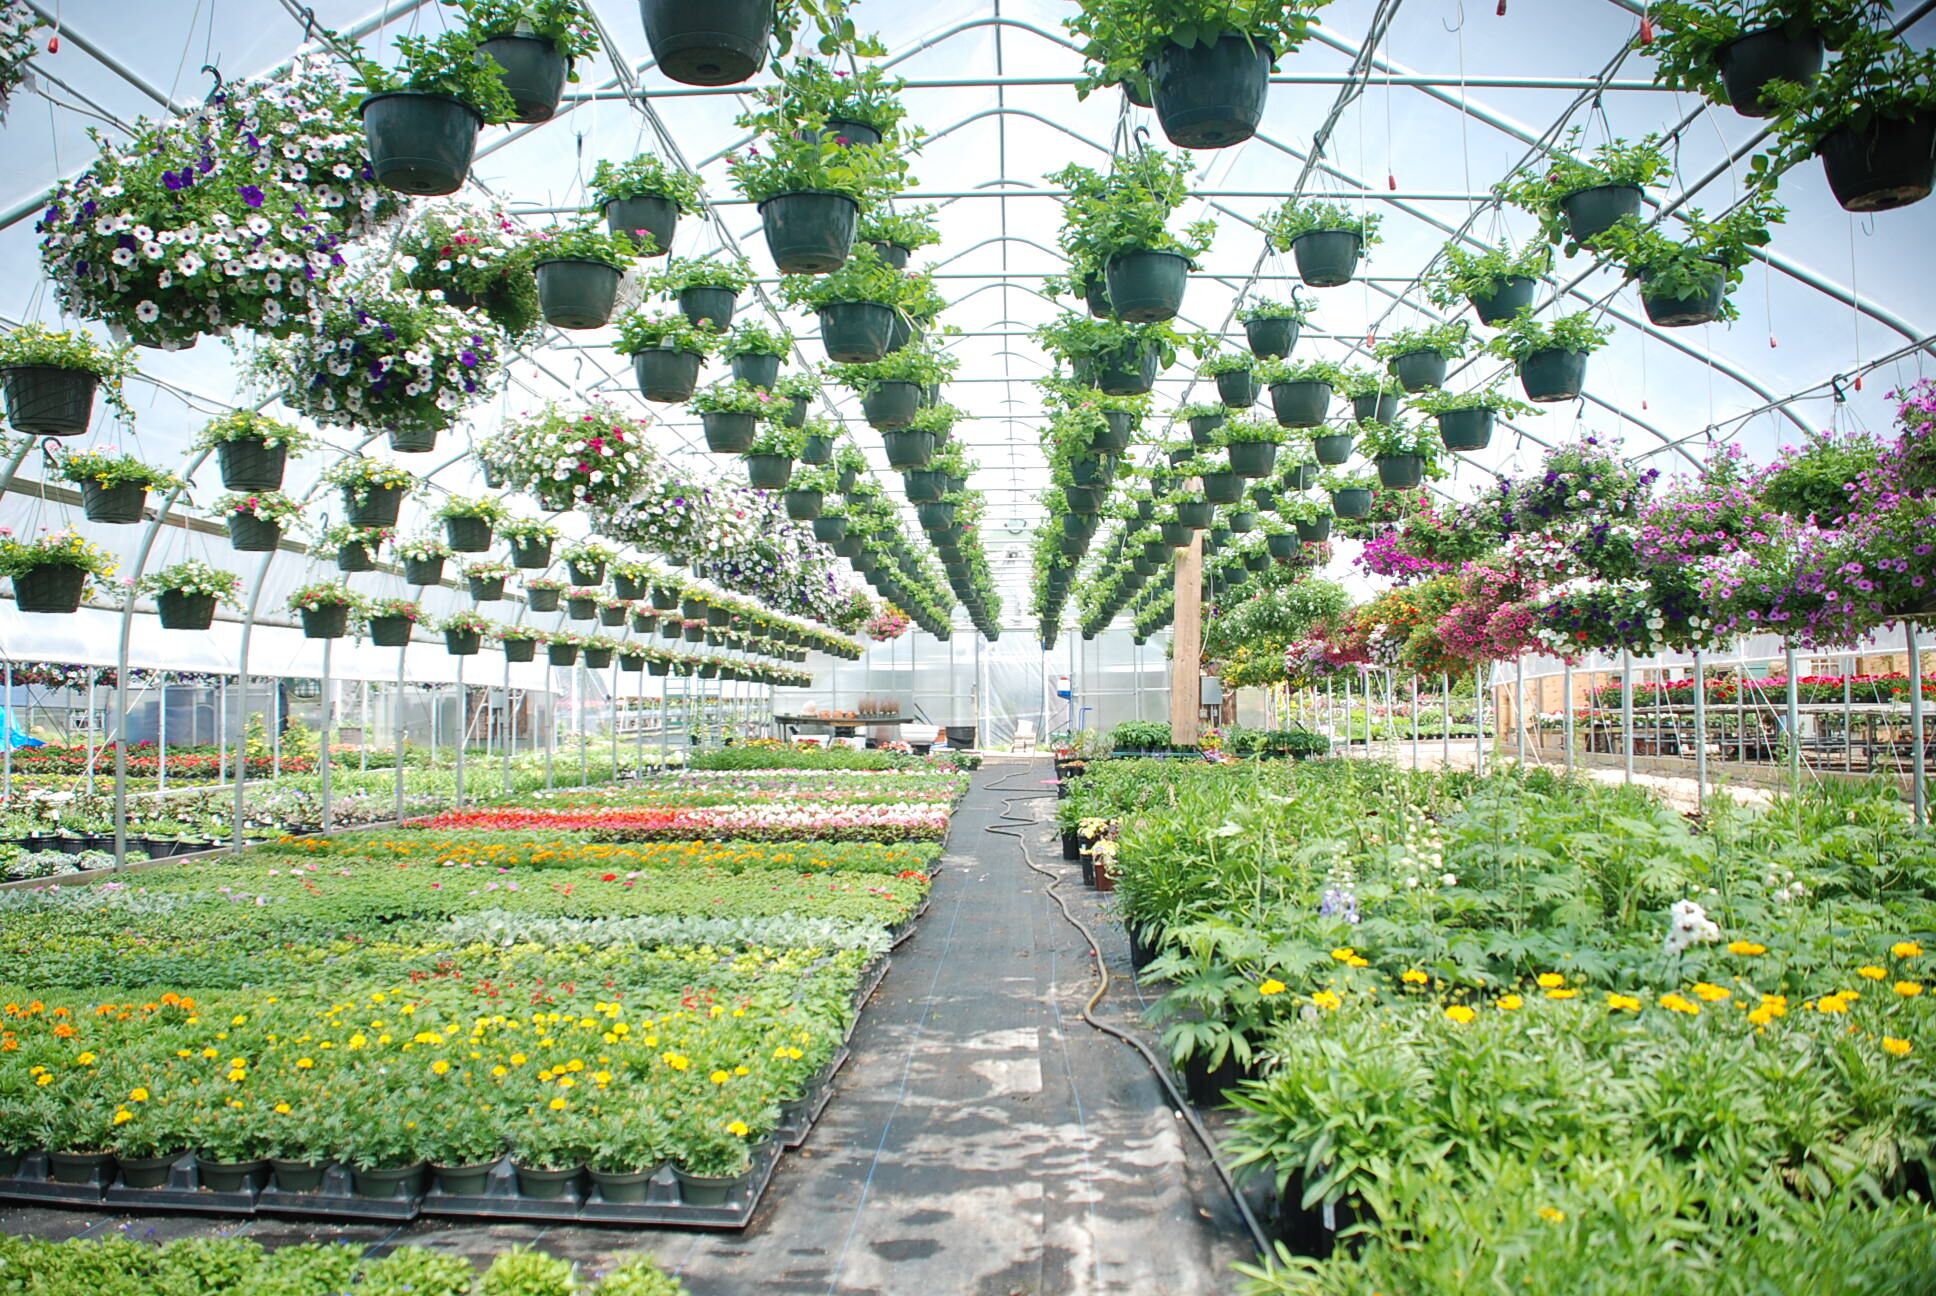 Controlling Greenhouse Humidity During Summers Hottest Months